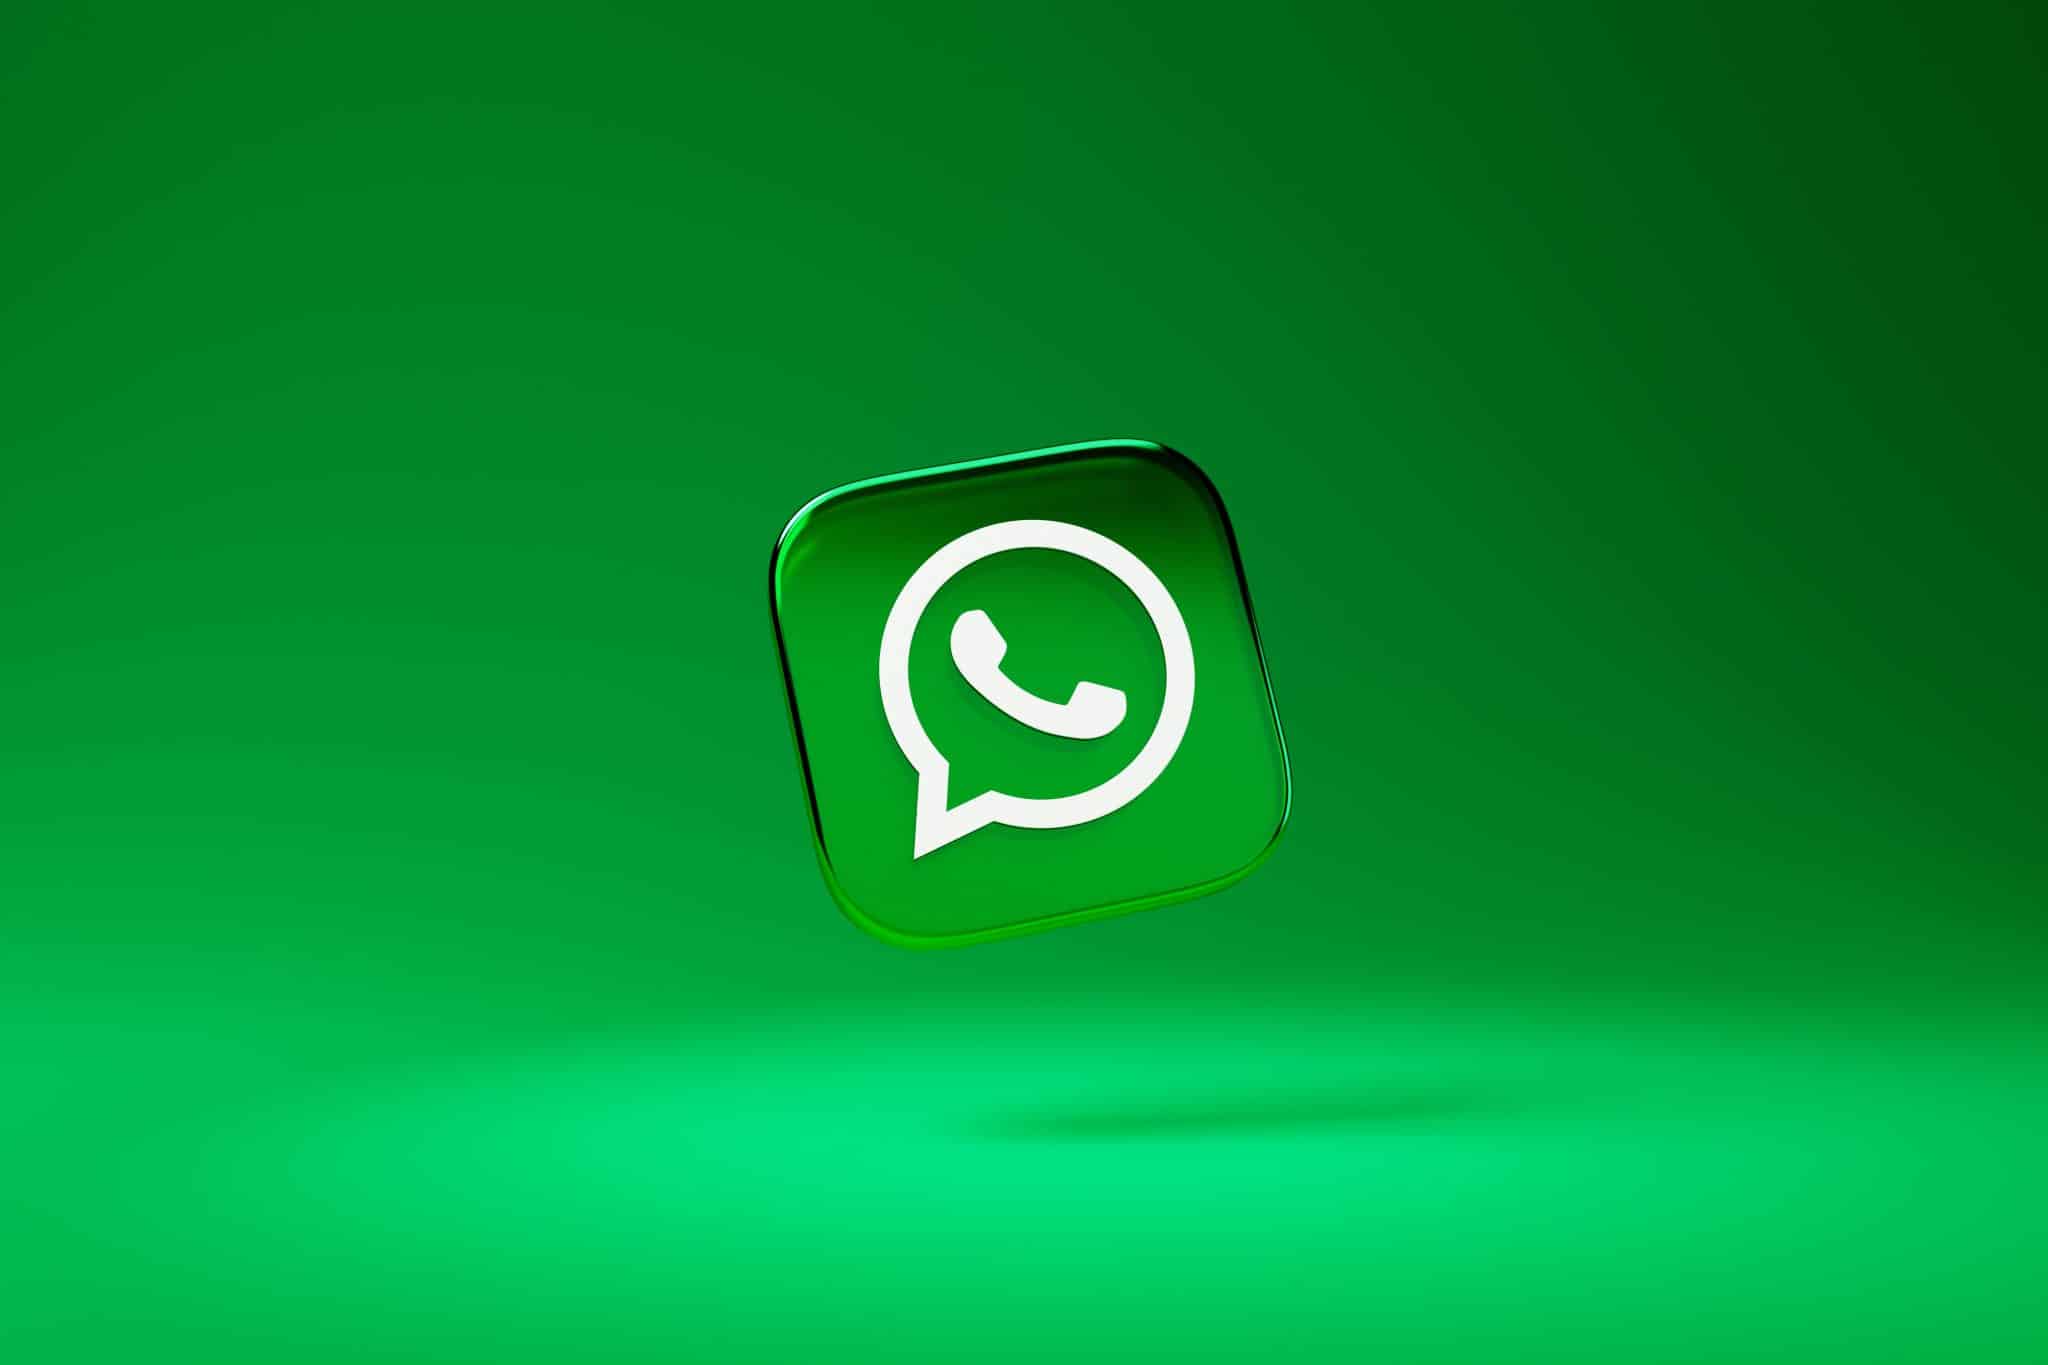 WhatsApp Threatens to Exit India If Forced to Break End-to-End Encryption